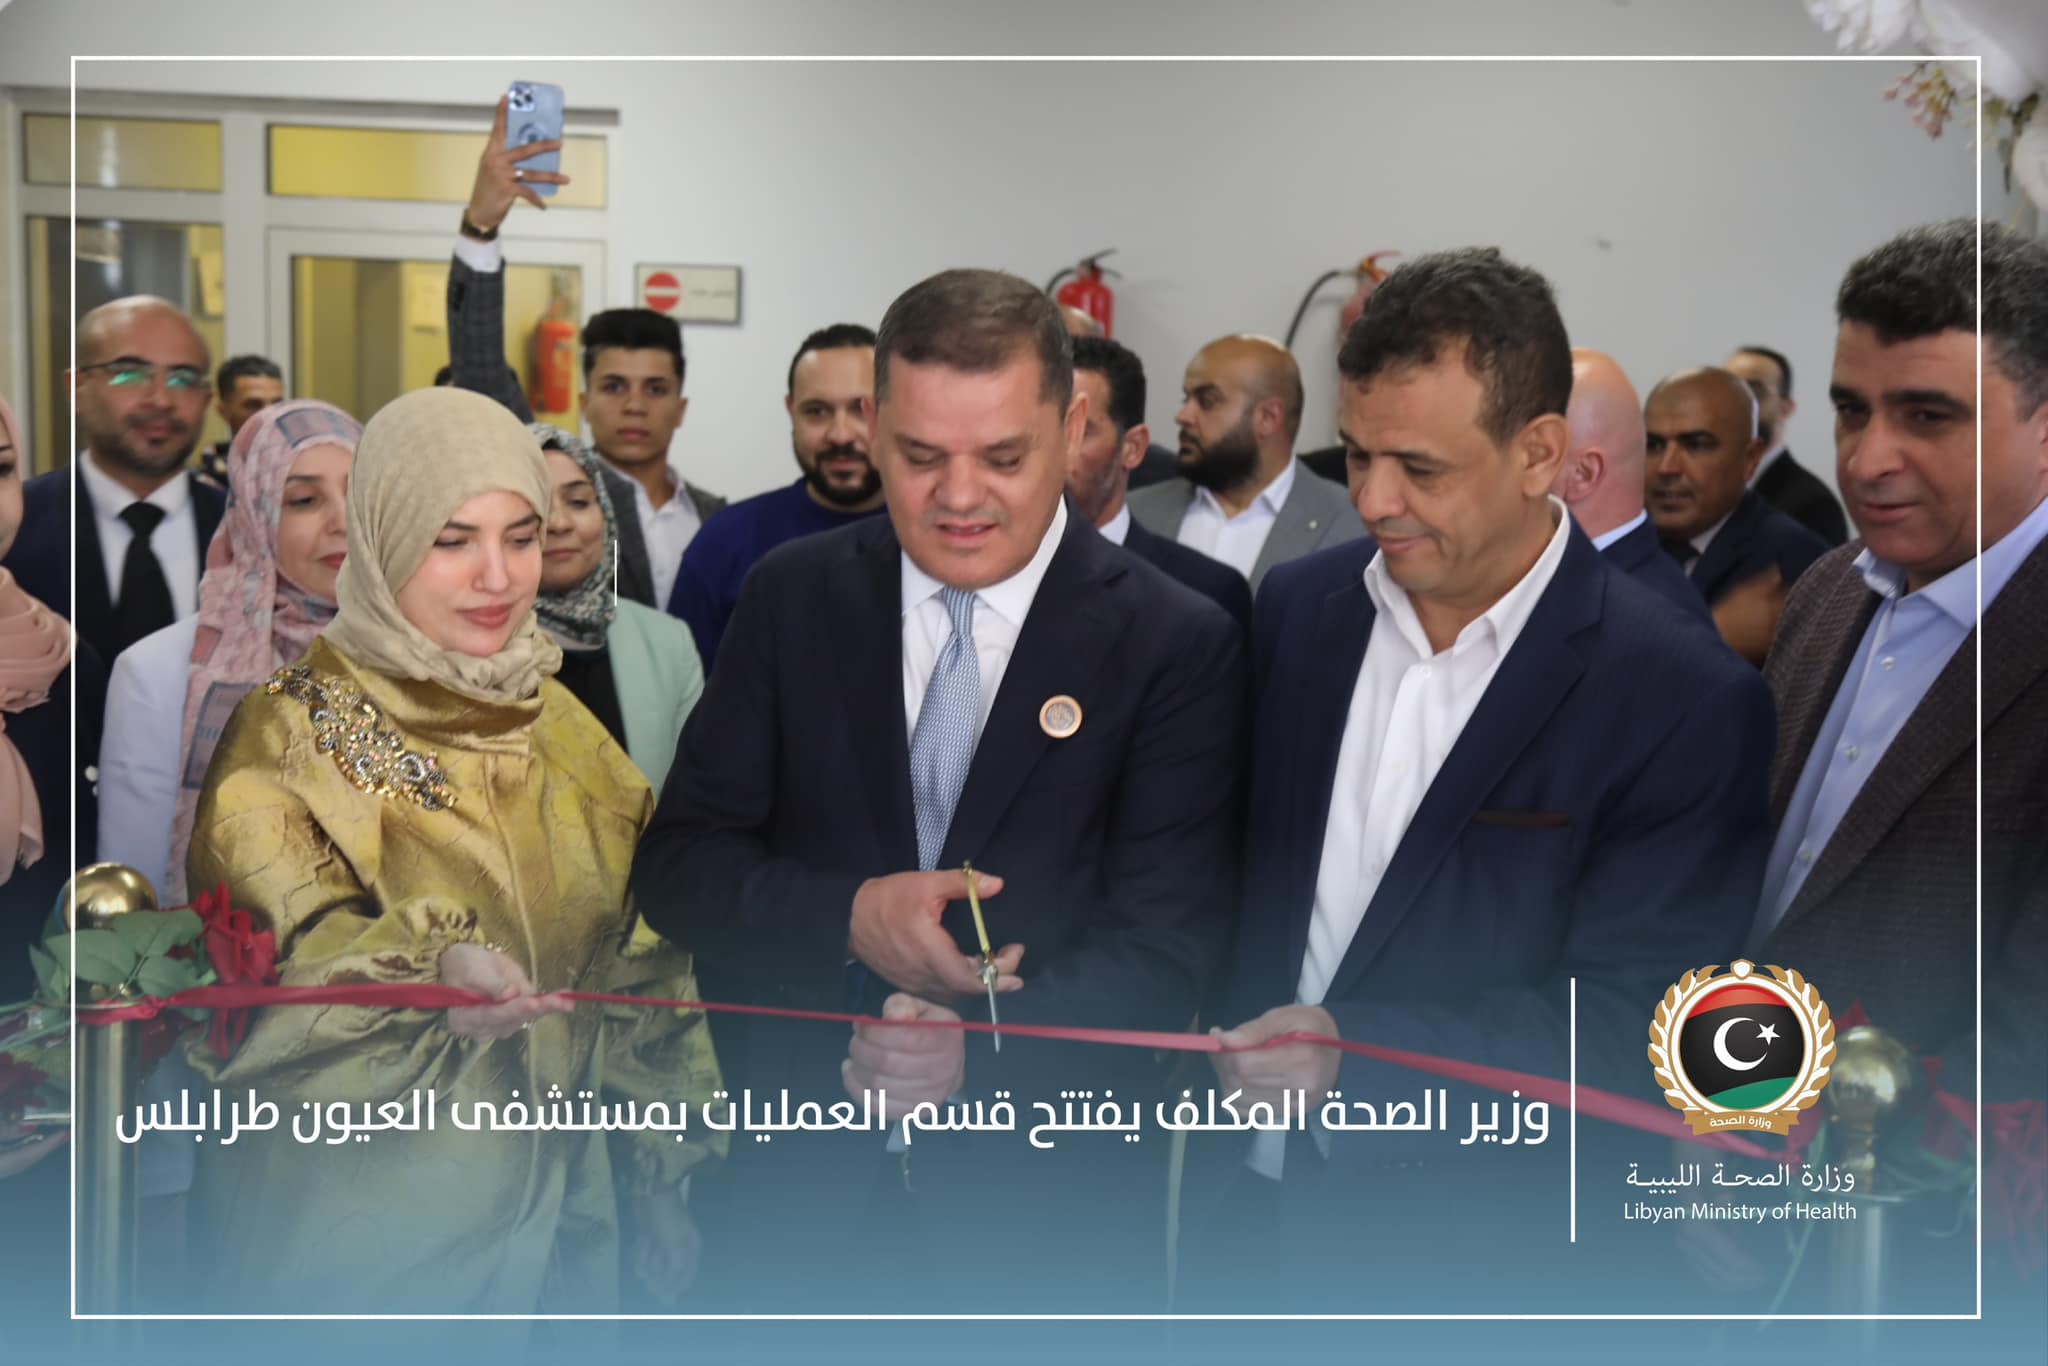   Operation theatres at the Eye Hospital in Tripoli opened by Head of Government and Minister of Health.